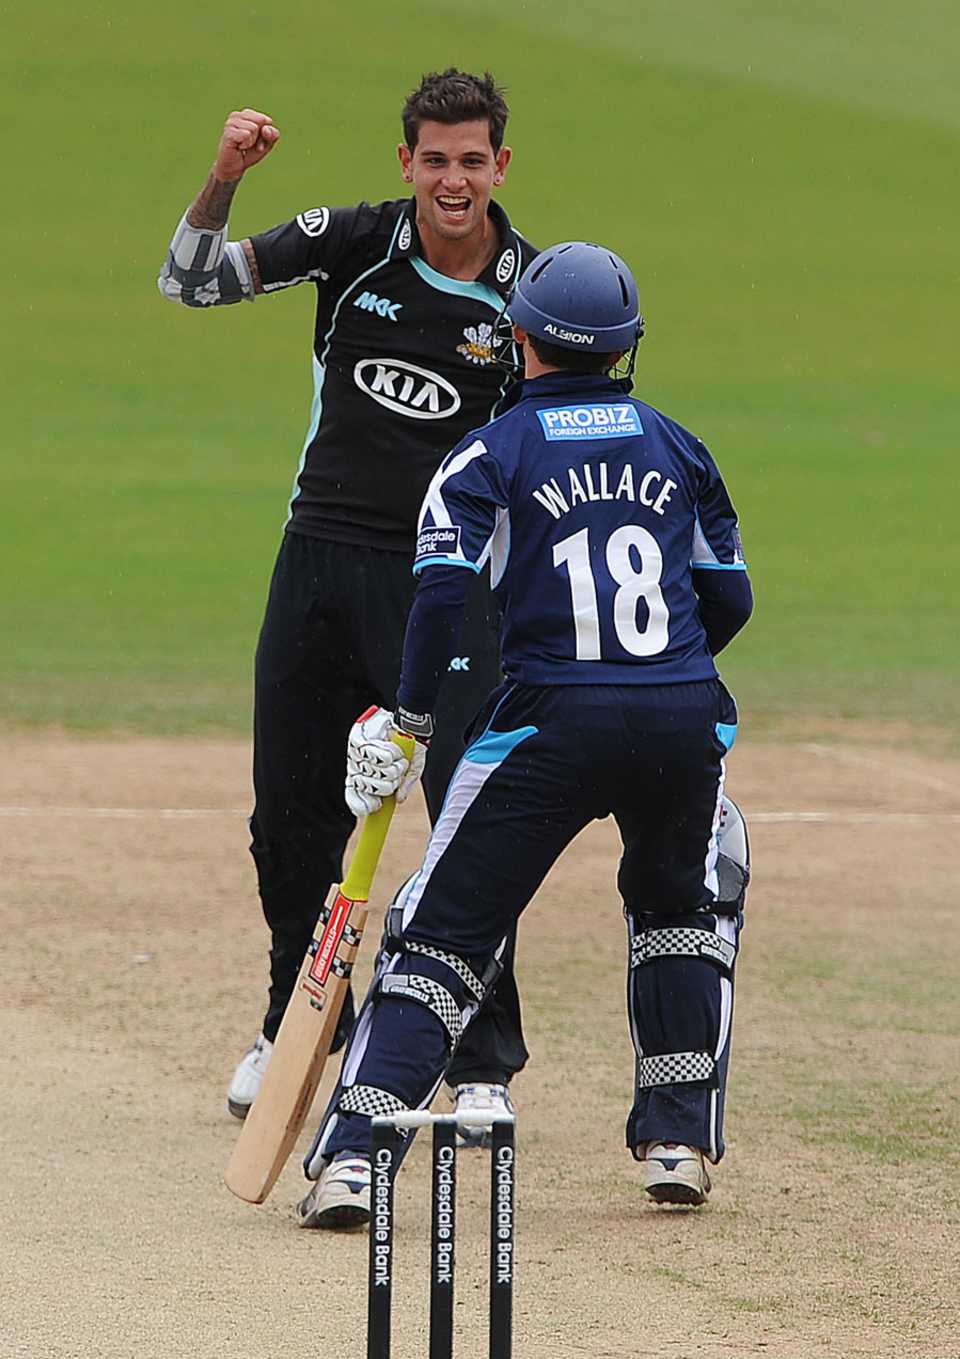 Jade Dernbach celebrates taking the wicket of Craig Wallace